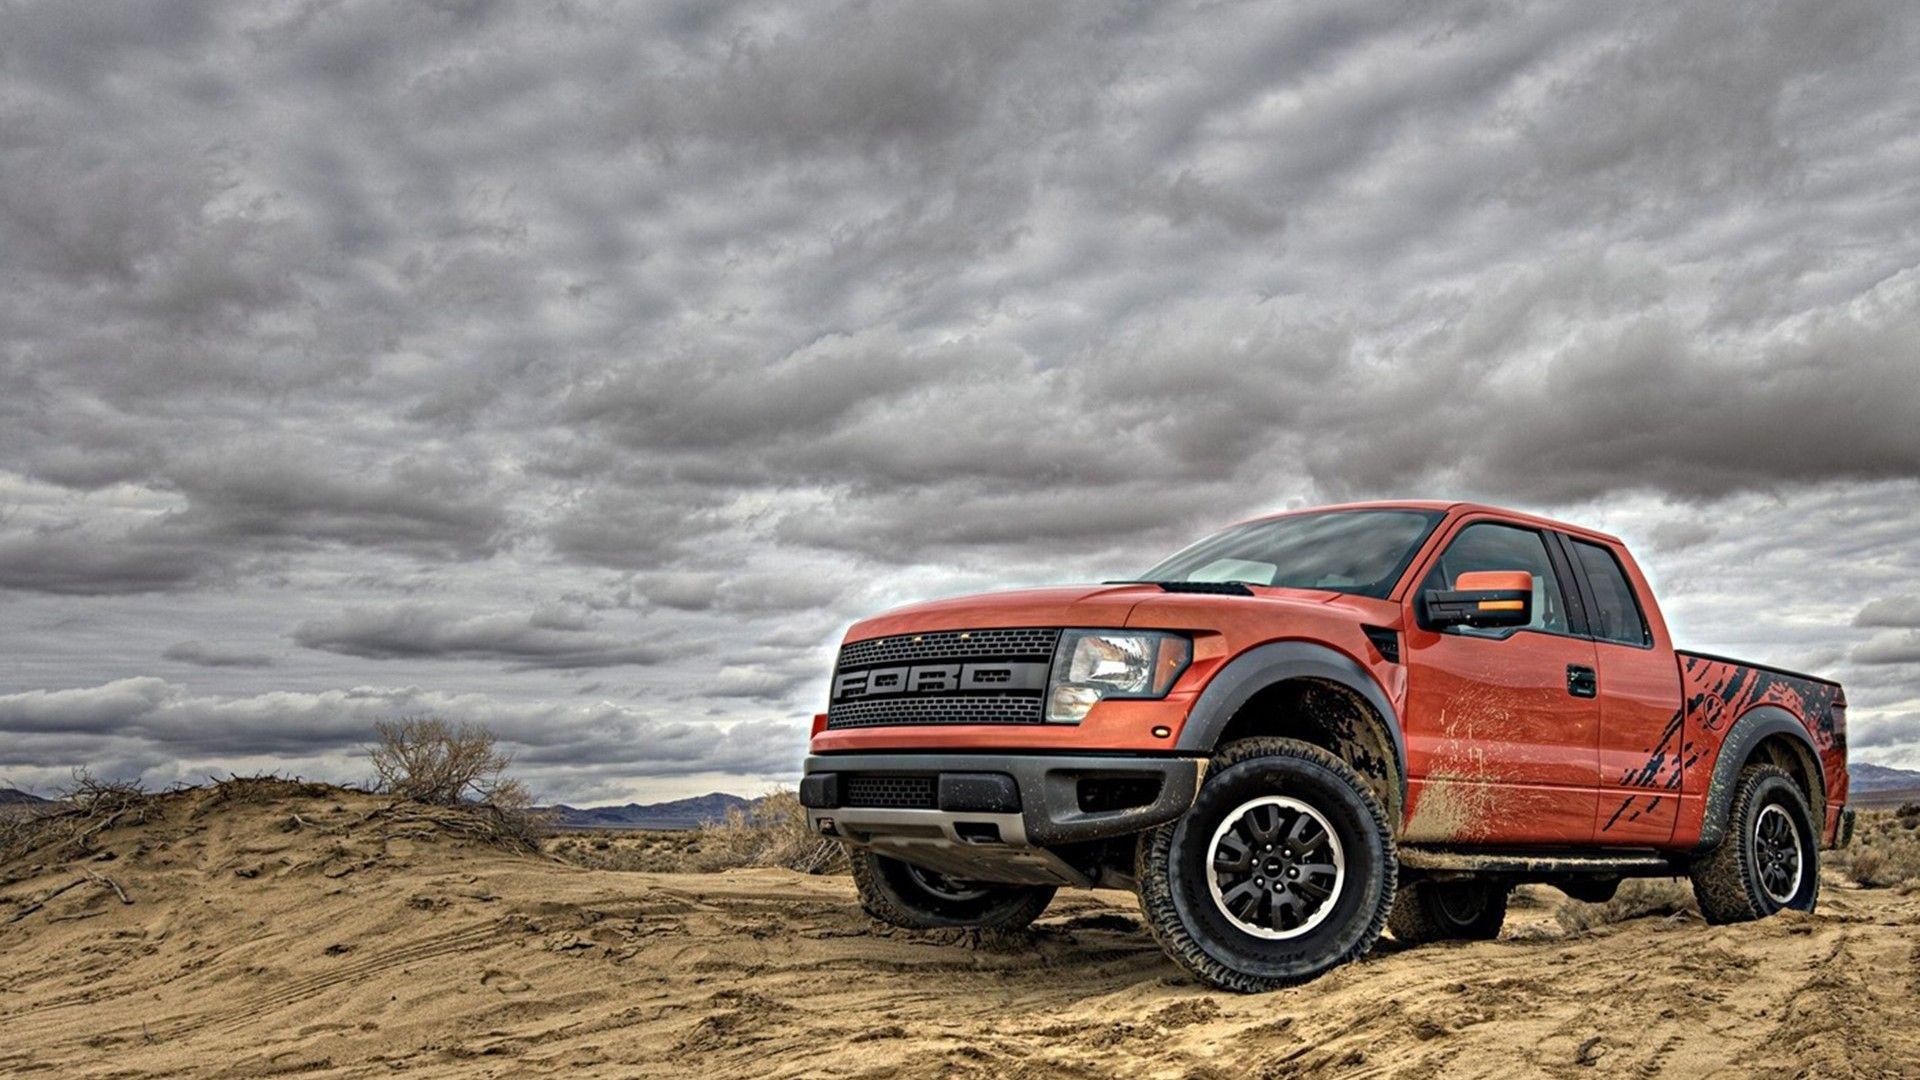 Ford F150 Wallpaper Full HD Picture